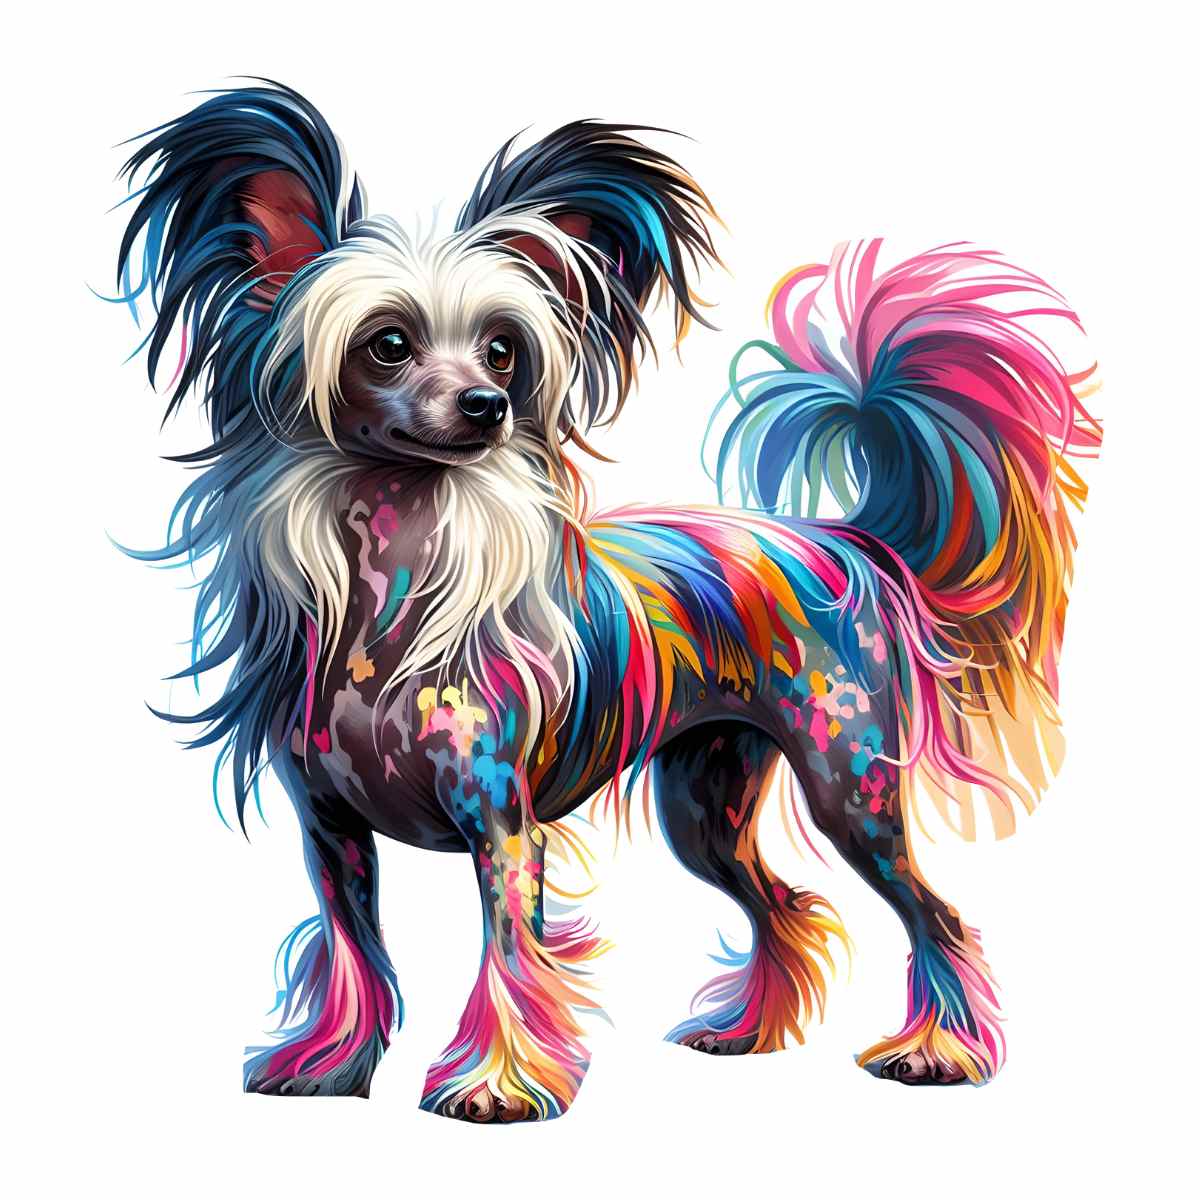 Animal Jigsaw Puzzle > Wooden Jigsaw Puzzle > Jigsaw Puzzle A4 Chinese Crested Dog - Jigsaw Puzzle